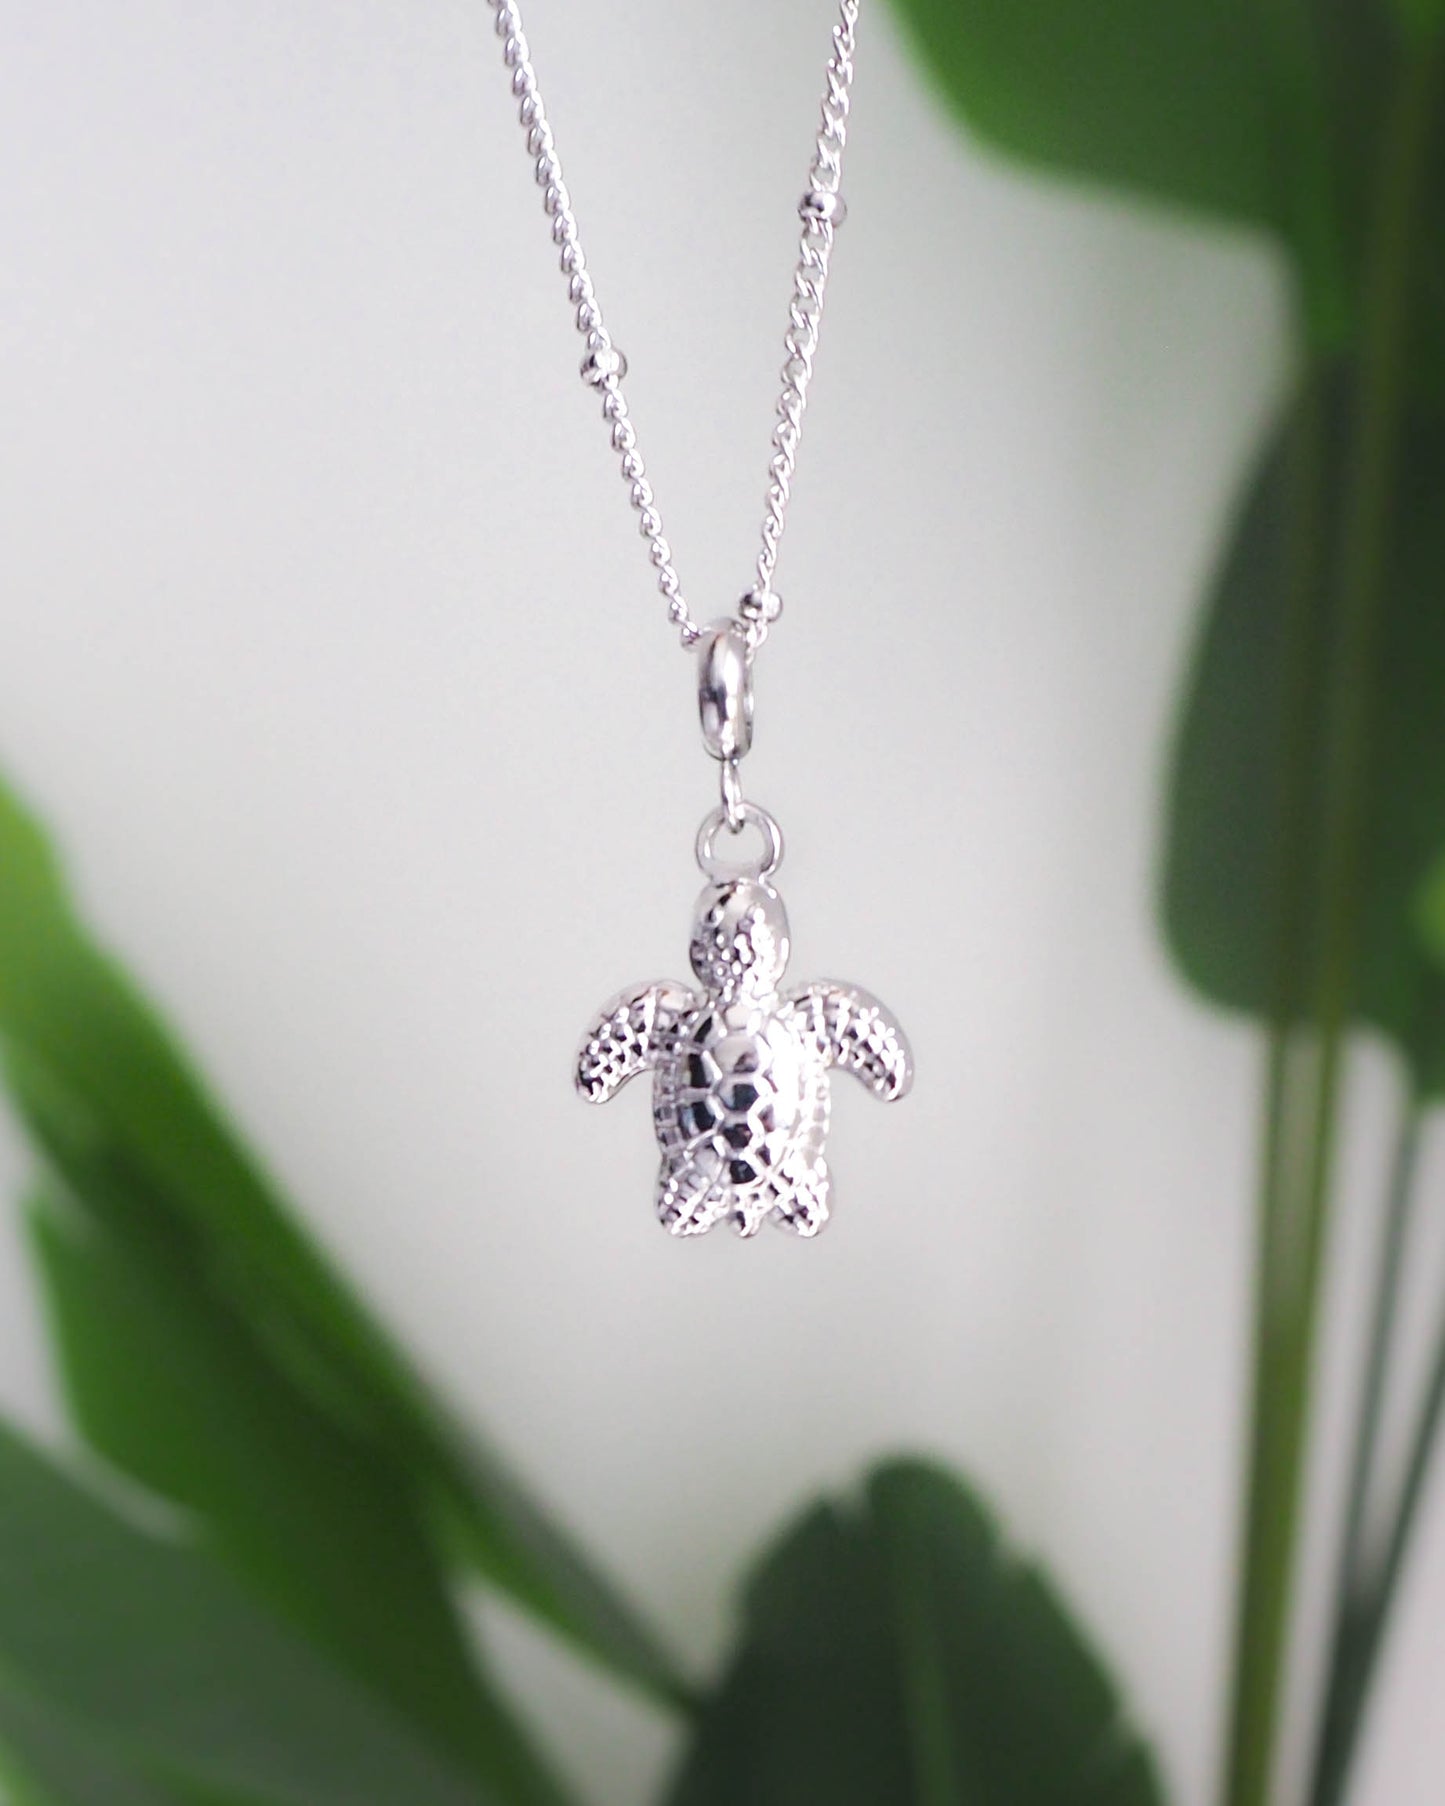 Silver Turtle Necklace made with Stainless Steel hypo allergen